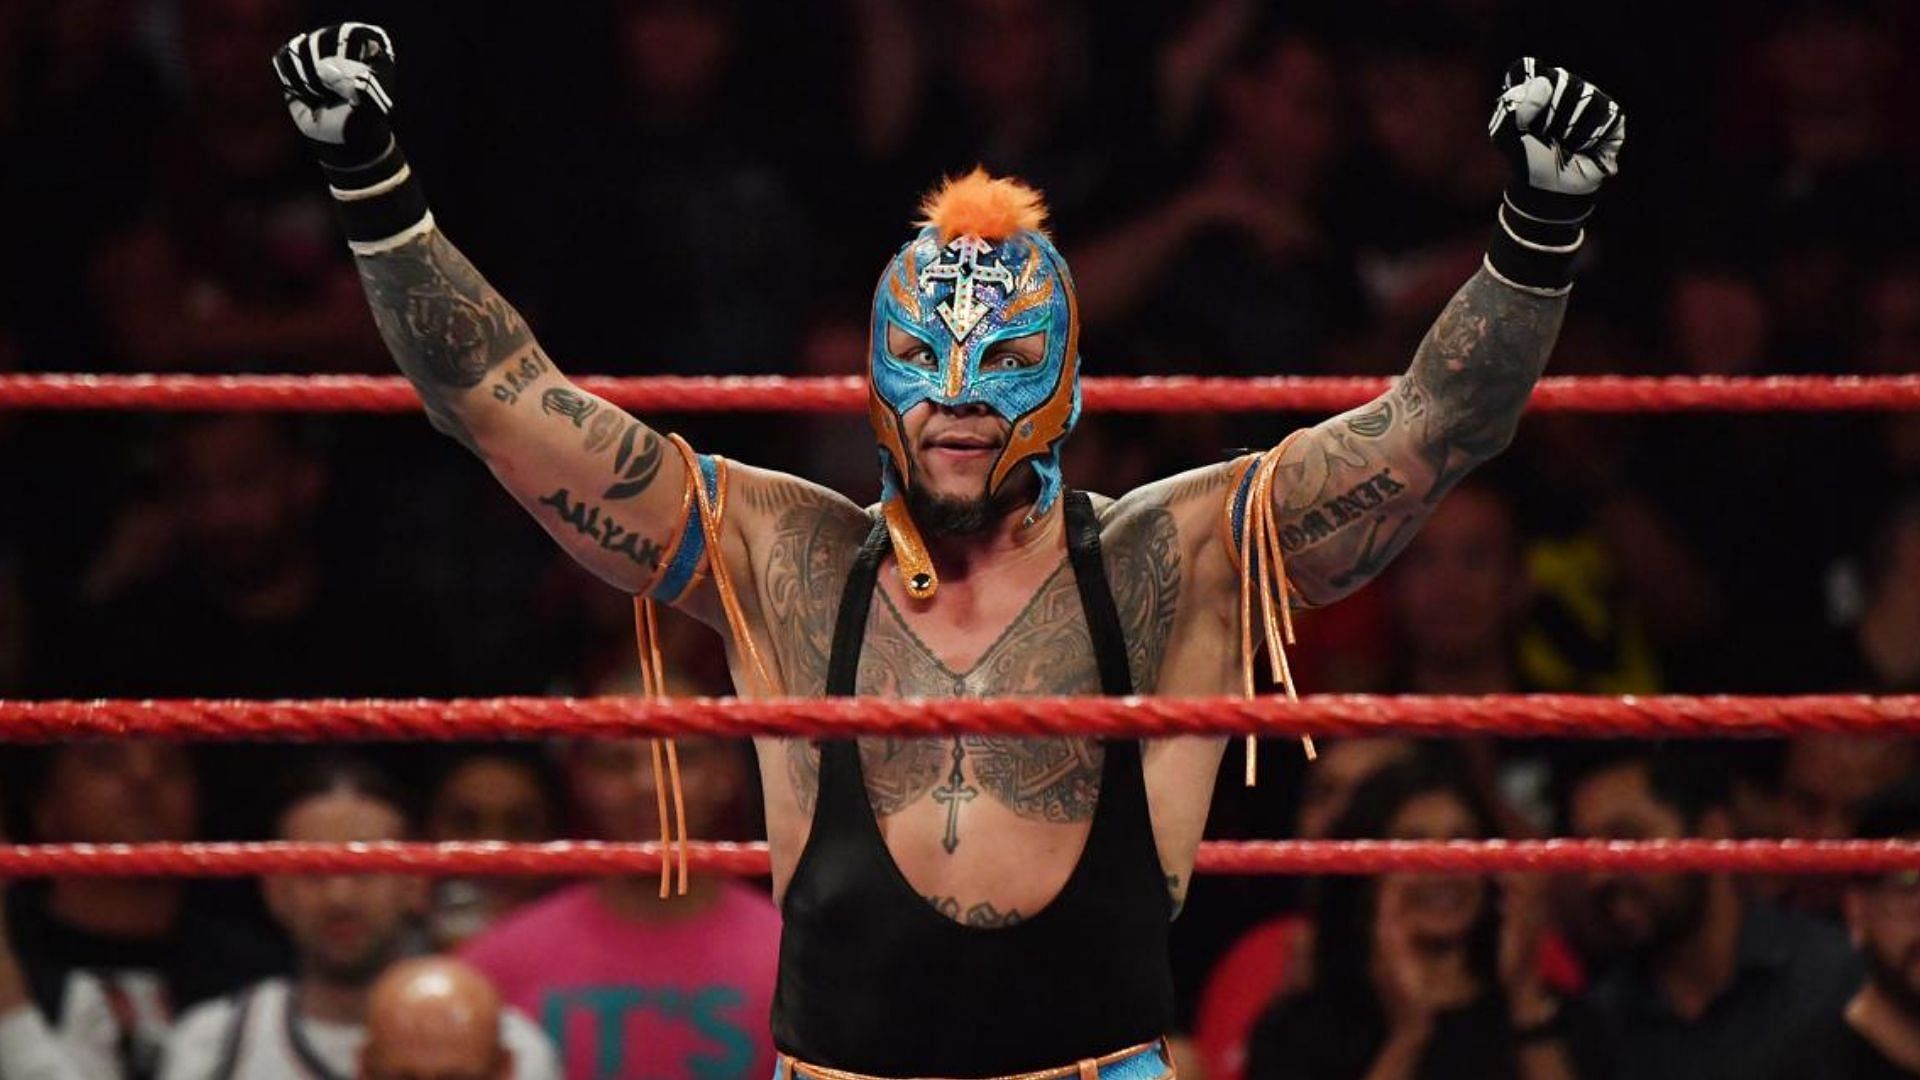 "We have great chemistry together" - Rey Mysterio names W...